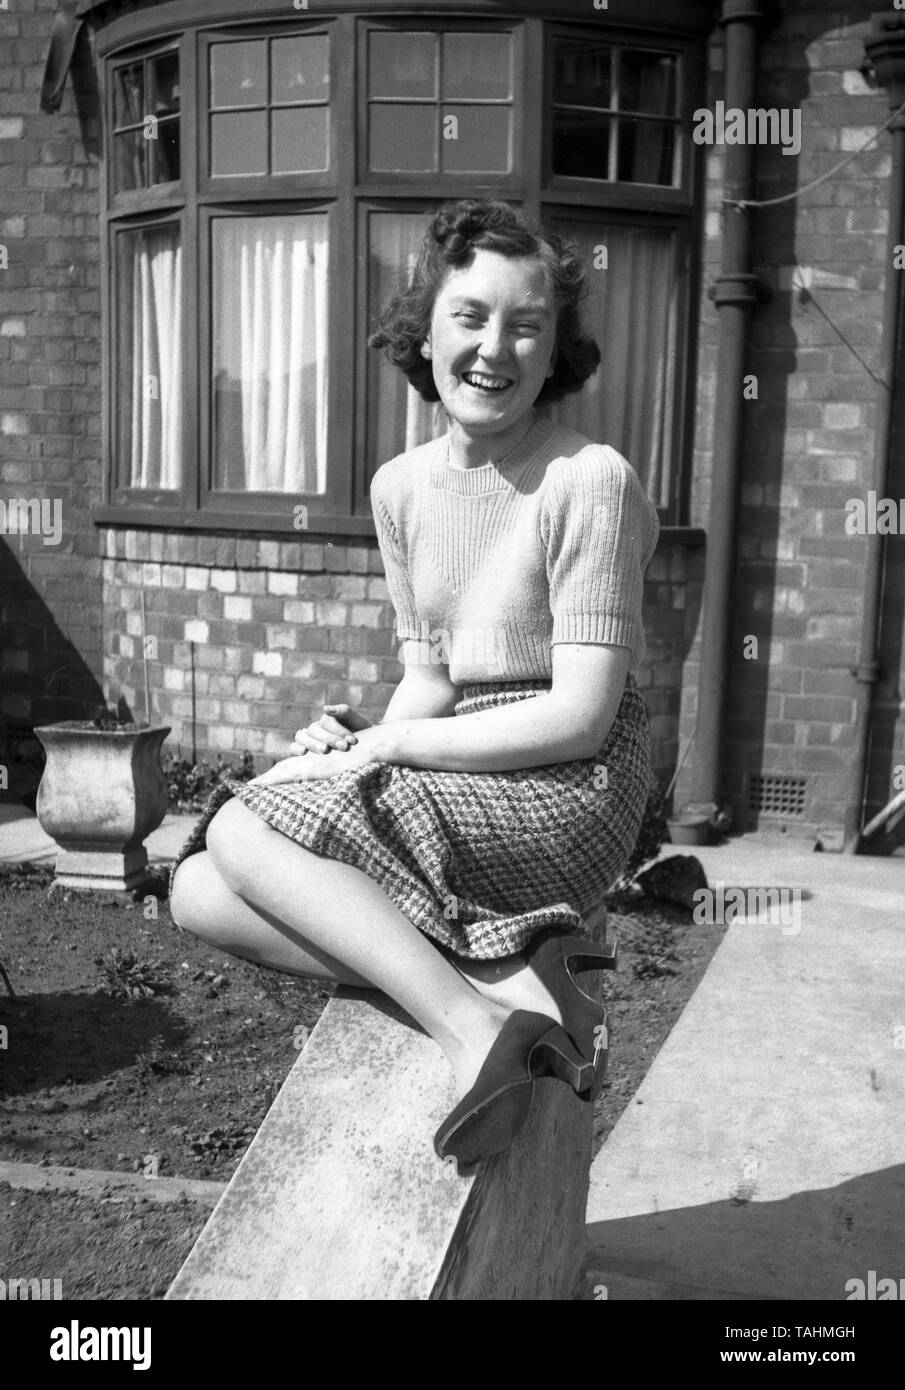 Family Life in the UK c1950  A young woman poses on a wall at the front of a house in a stunning portrait.  Photo by Tony Henshaw Stock Photo